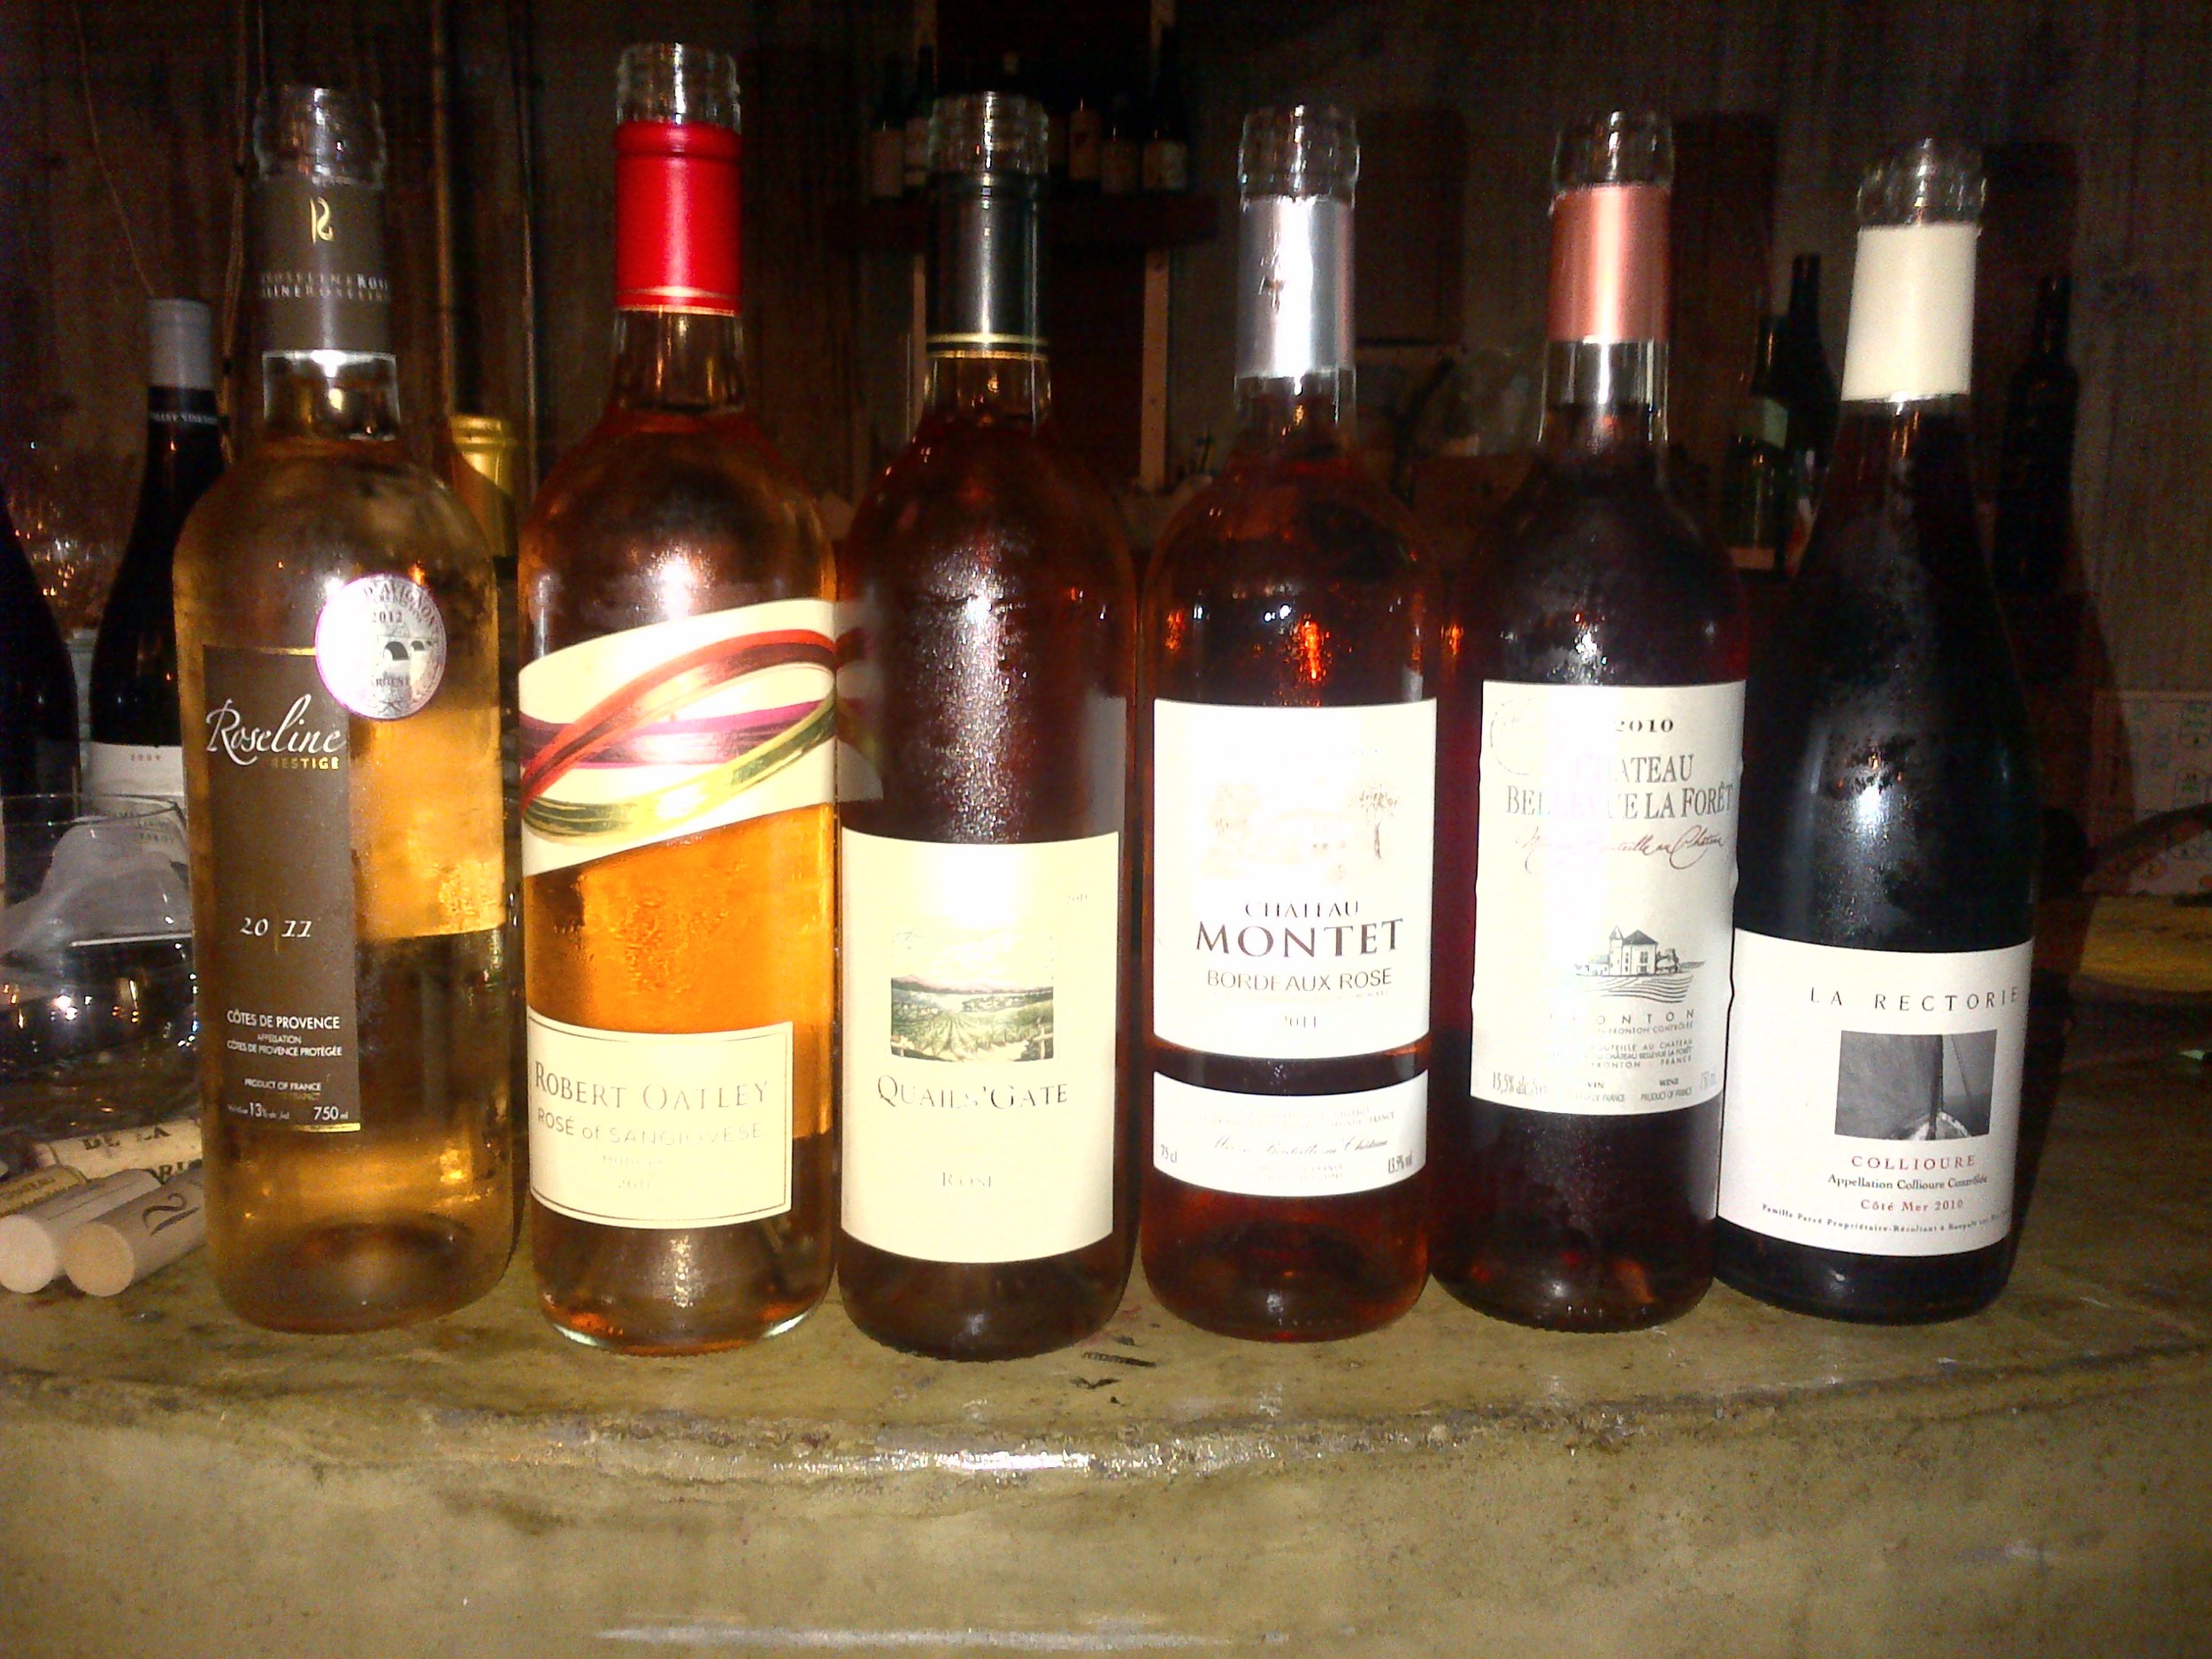  Rosé focus group the night before. Representation from Loire, Bordeaux, Tavel, Italy and BC.​ 